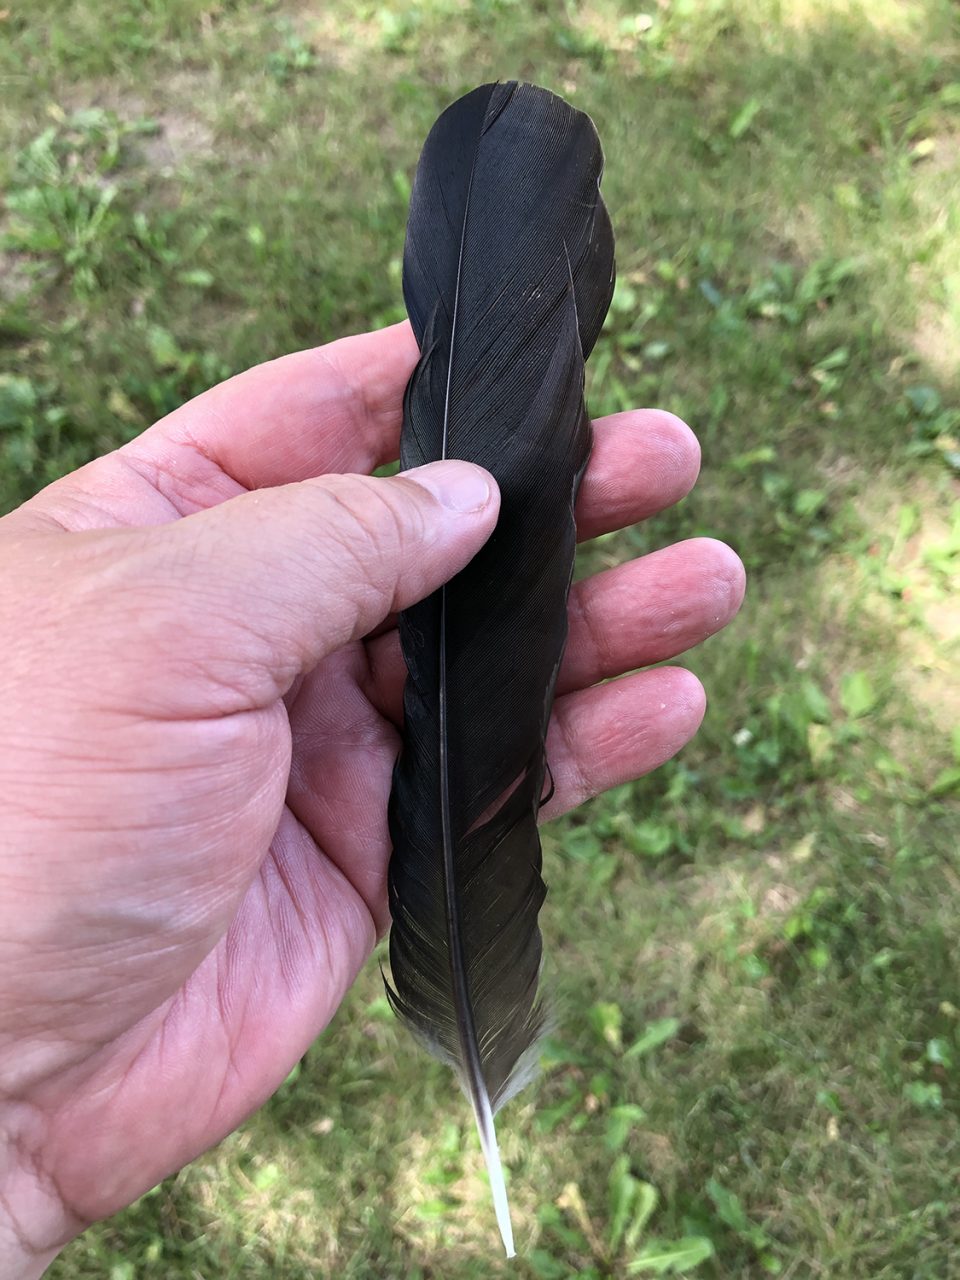 Blackbird feather found on the ground, where it was returned after this snapshot.